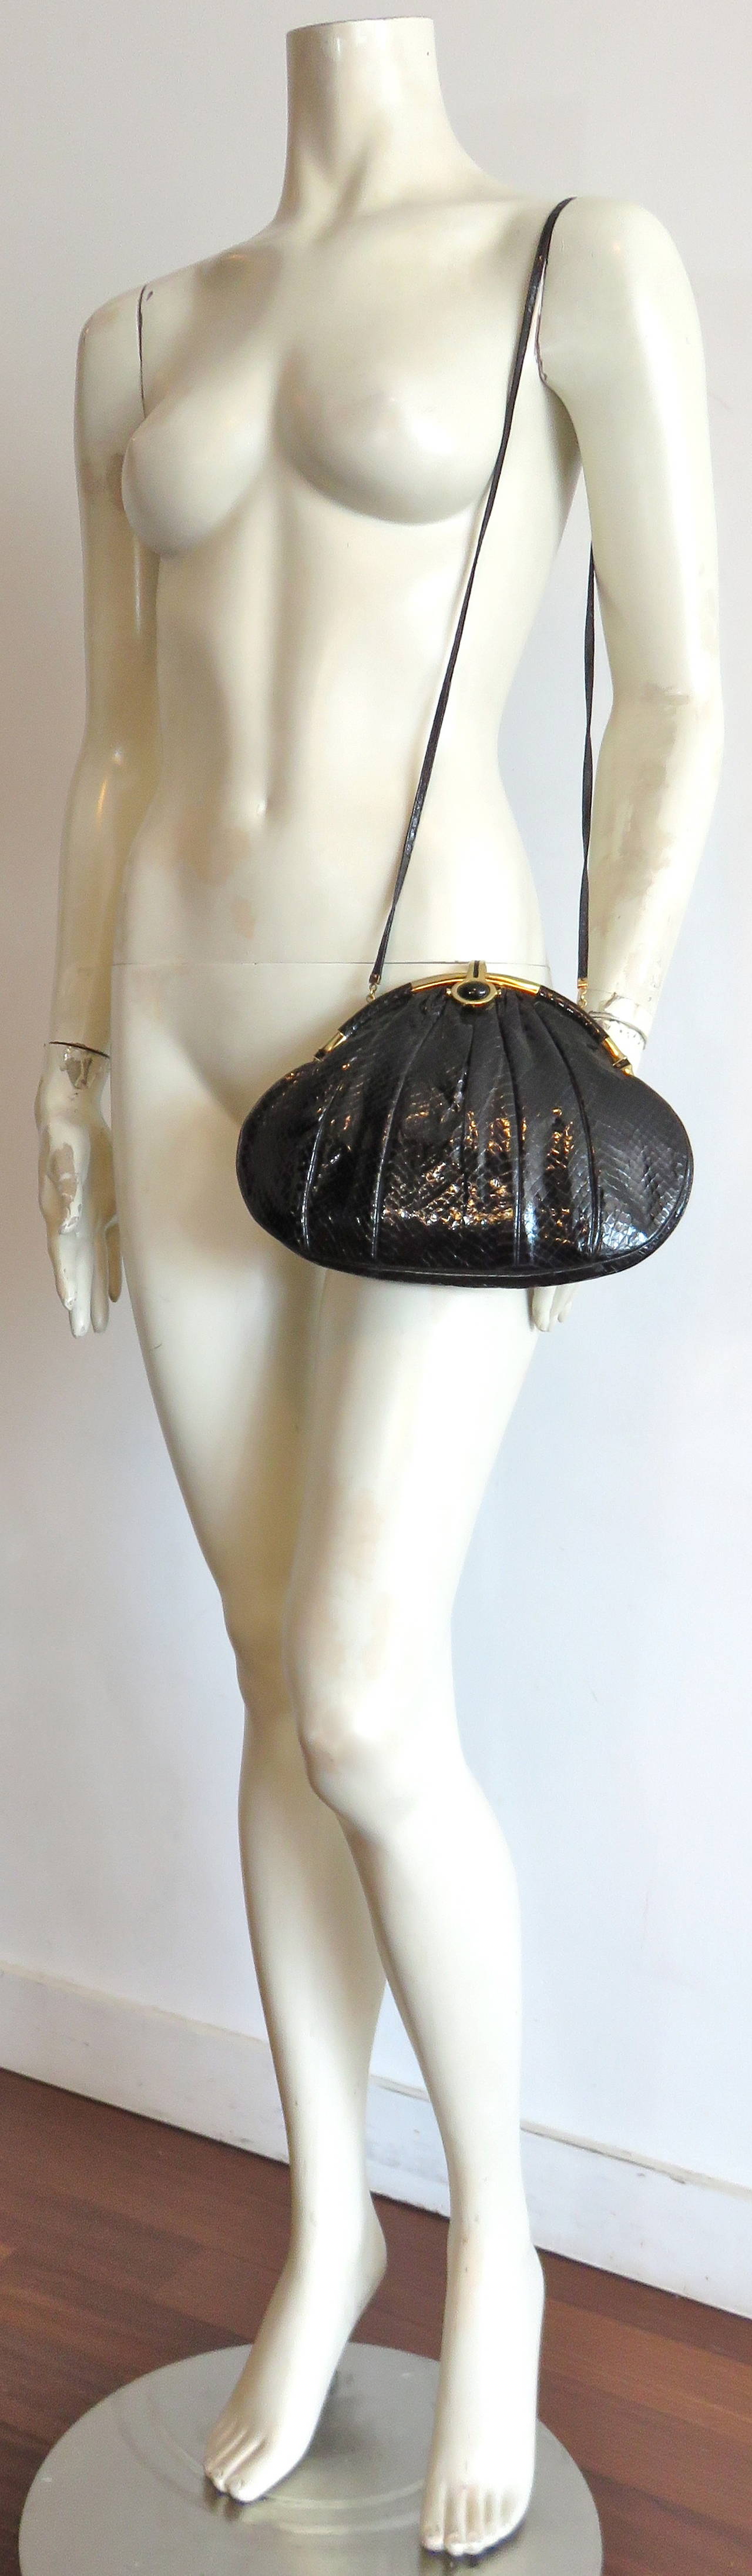 1960's JUDITH LEIBER Black python evening bag In Excellent Condition For Sale In Newport Beach, CA